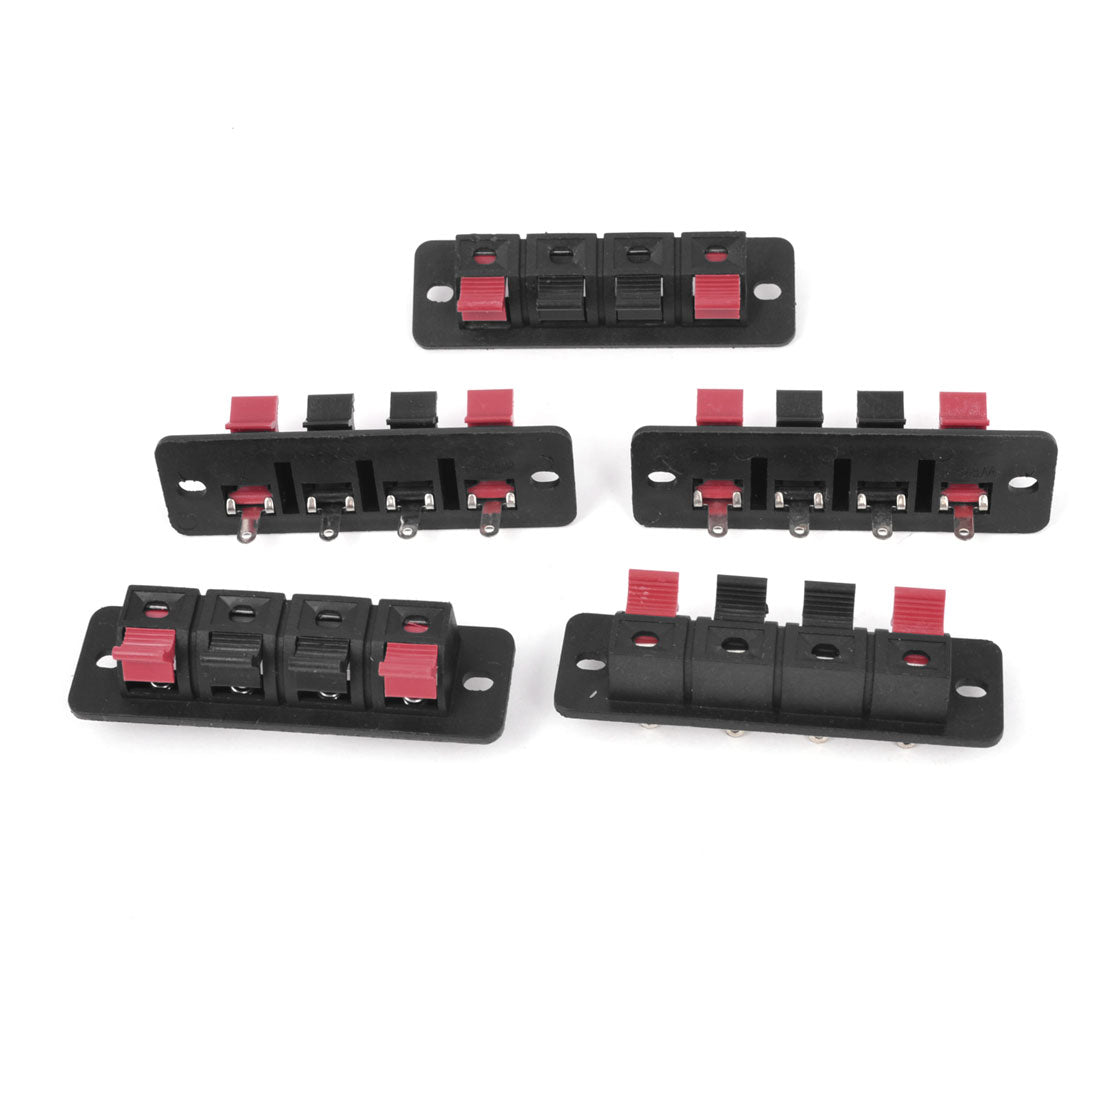 uxcell Uxcell 5Pcs 4 Way Stereo Speaker Plate Terminal Strip Push Release Connector Block